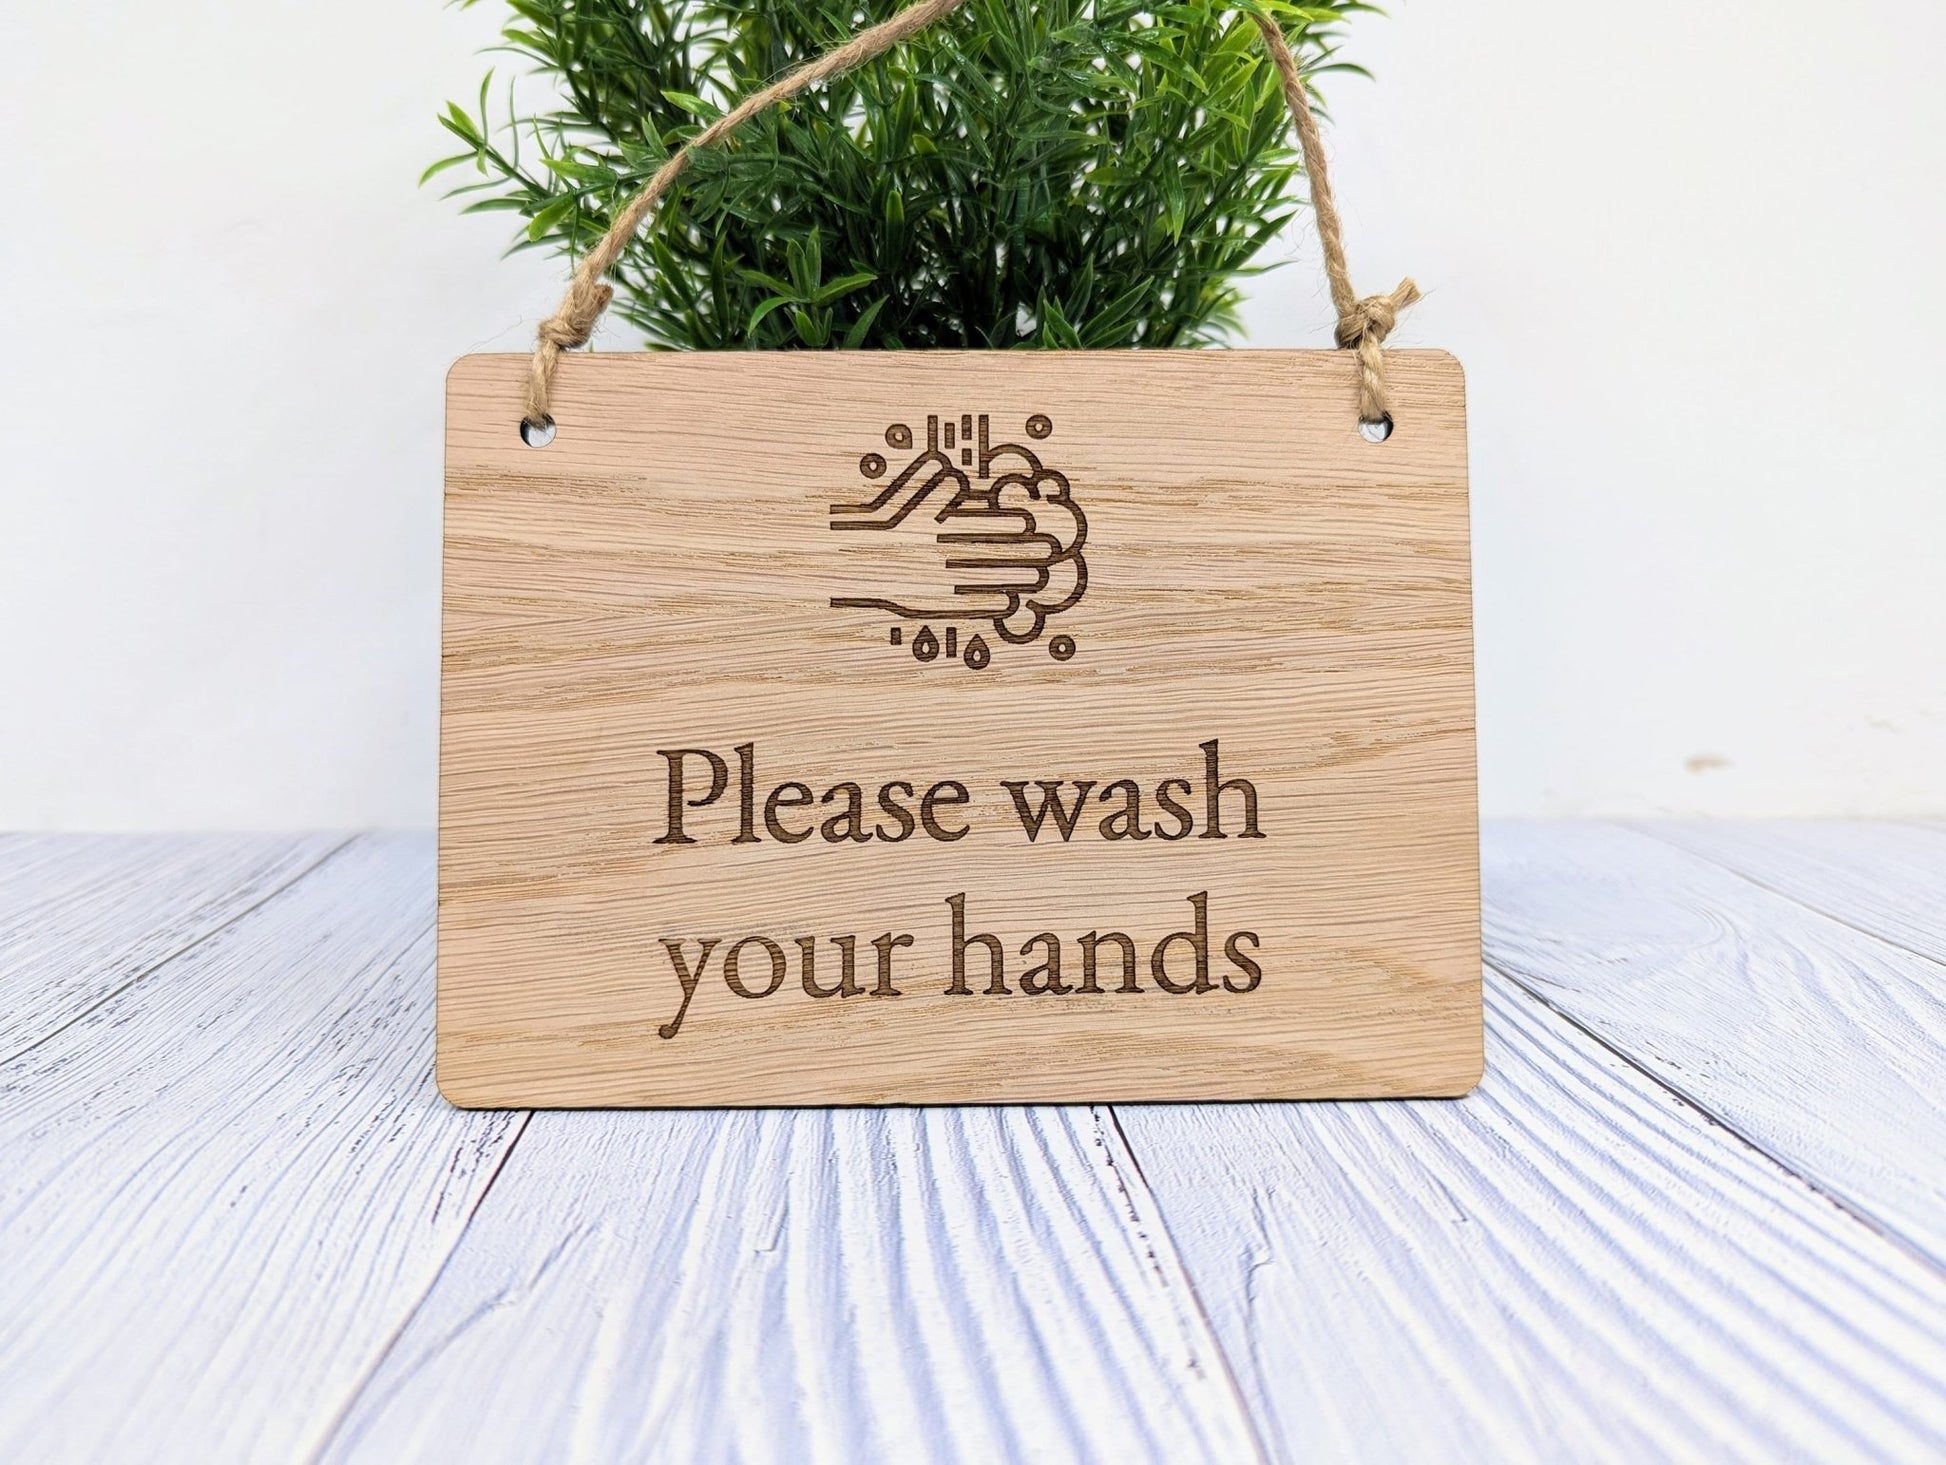 Please Wash Your Hands" Wooden Sign - Oak Veneered MDF - Ideal for Homes, Offices, Restaurants - Hygiene Reminder - Easy to Install - CherryGroveCraft